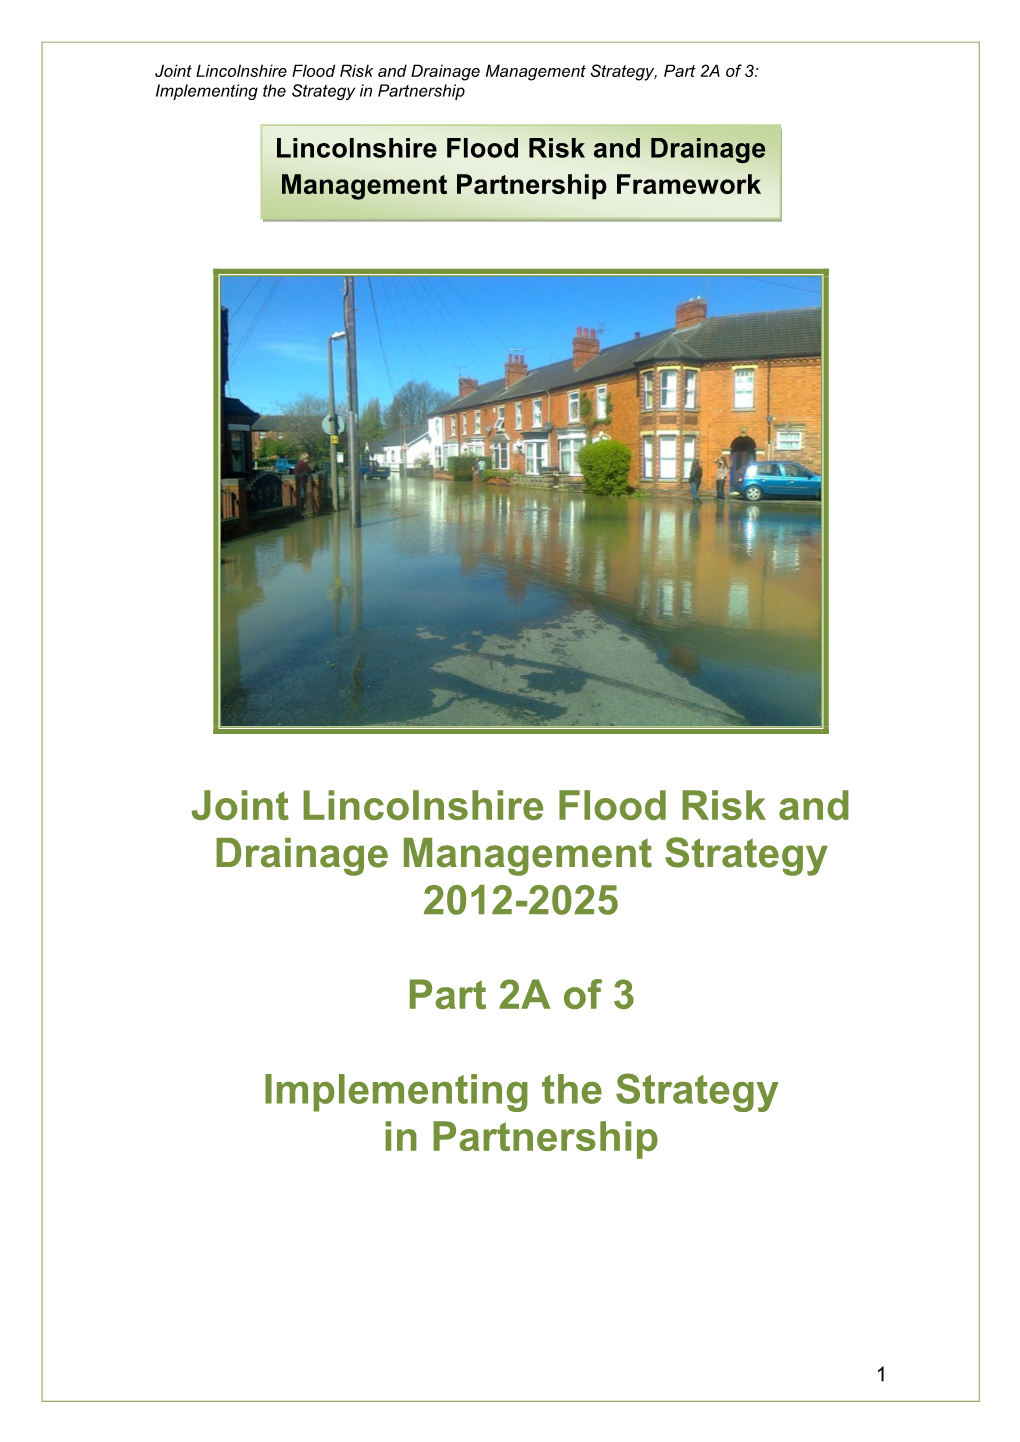 Joint Lincolnshire Flood Risk and Drainage Management Strategy, Part 2A of 3: Implementing the Strategy in Partnership